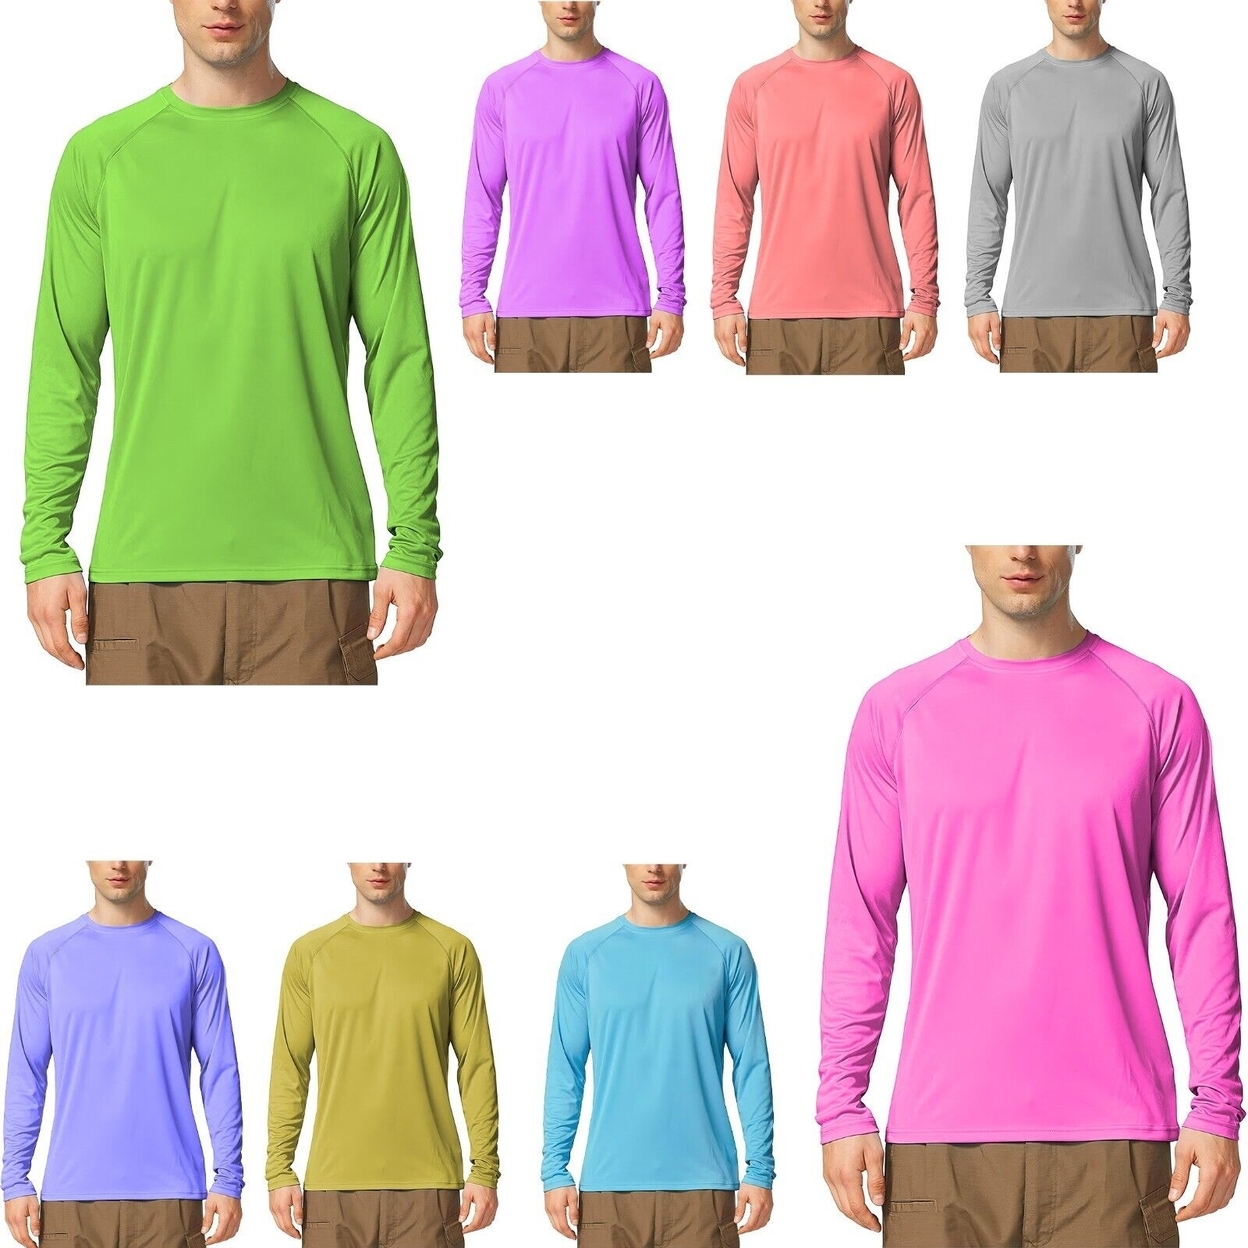 3-Pack: Men's Dri-Fit Moisture Wicking Athletic Cool Performance Slim Fit Long Sleeve T-Shirts - Small